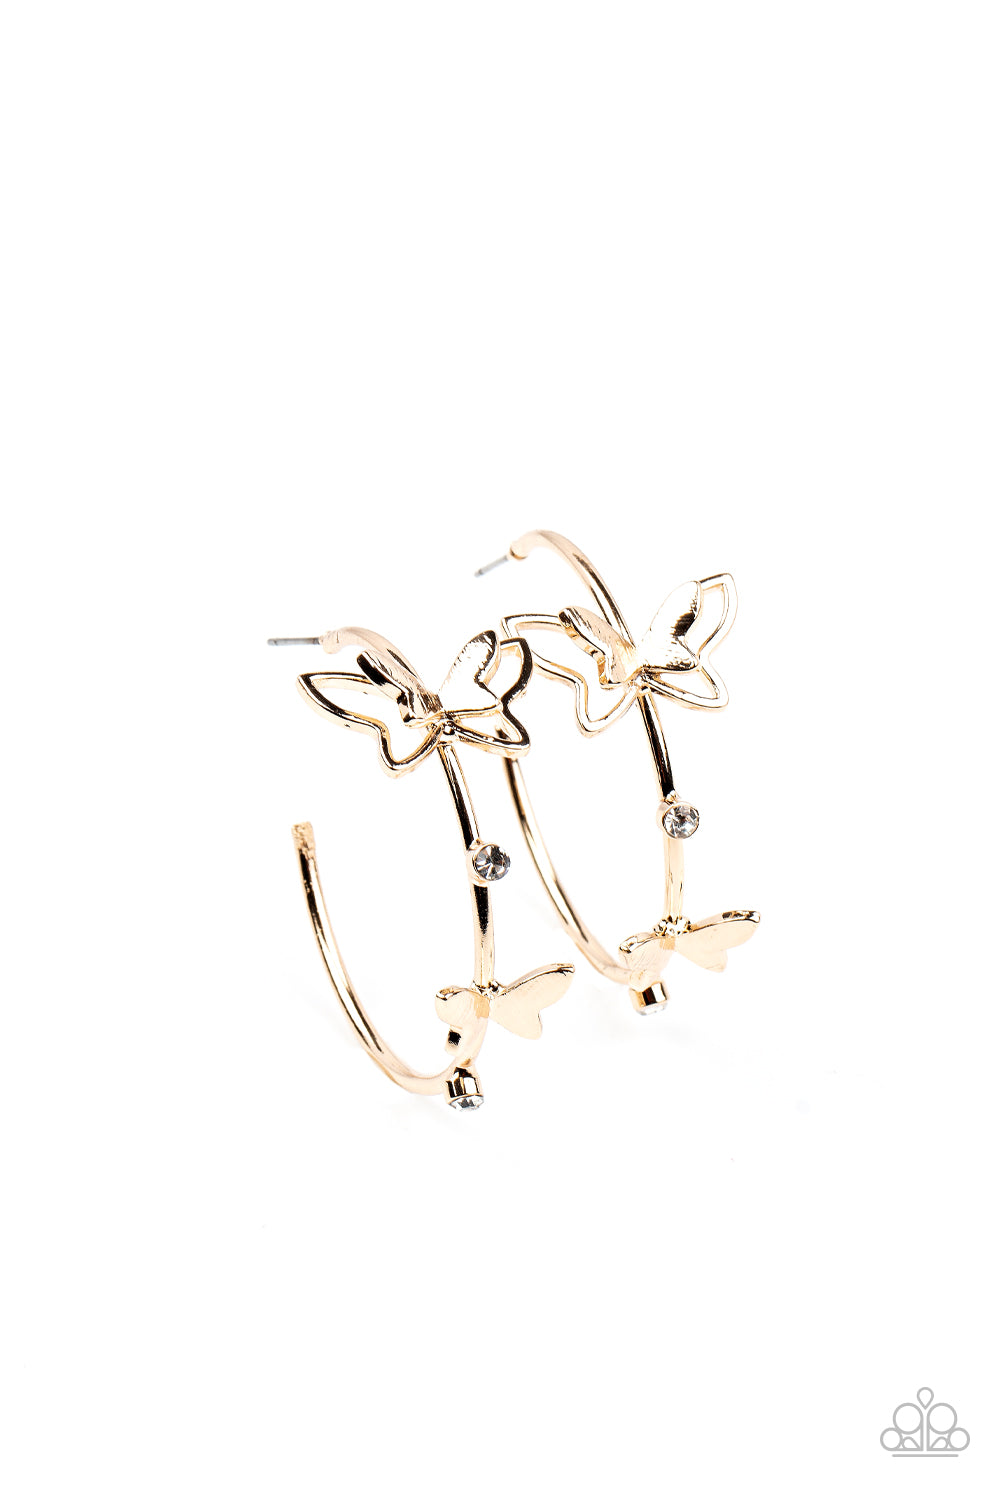 Full Out Flutter Gold Earring - Paparazzi Accessories  A pair of dainty gold butterflies flutter atop a glistening gold hoop dotted with dainty white rhinestones, creating a whimsical sight. Earring attaches to a standard post fitting. Hoop measures approximately 1 1/2" in diameter.  Sold as one pair of hoop earrings.